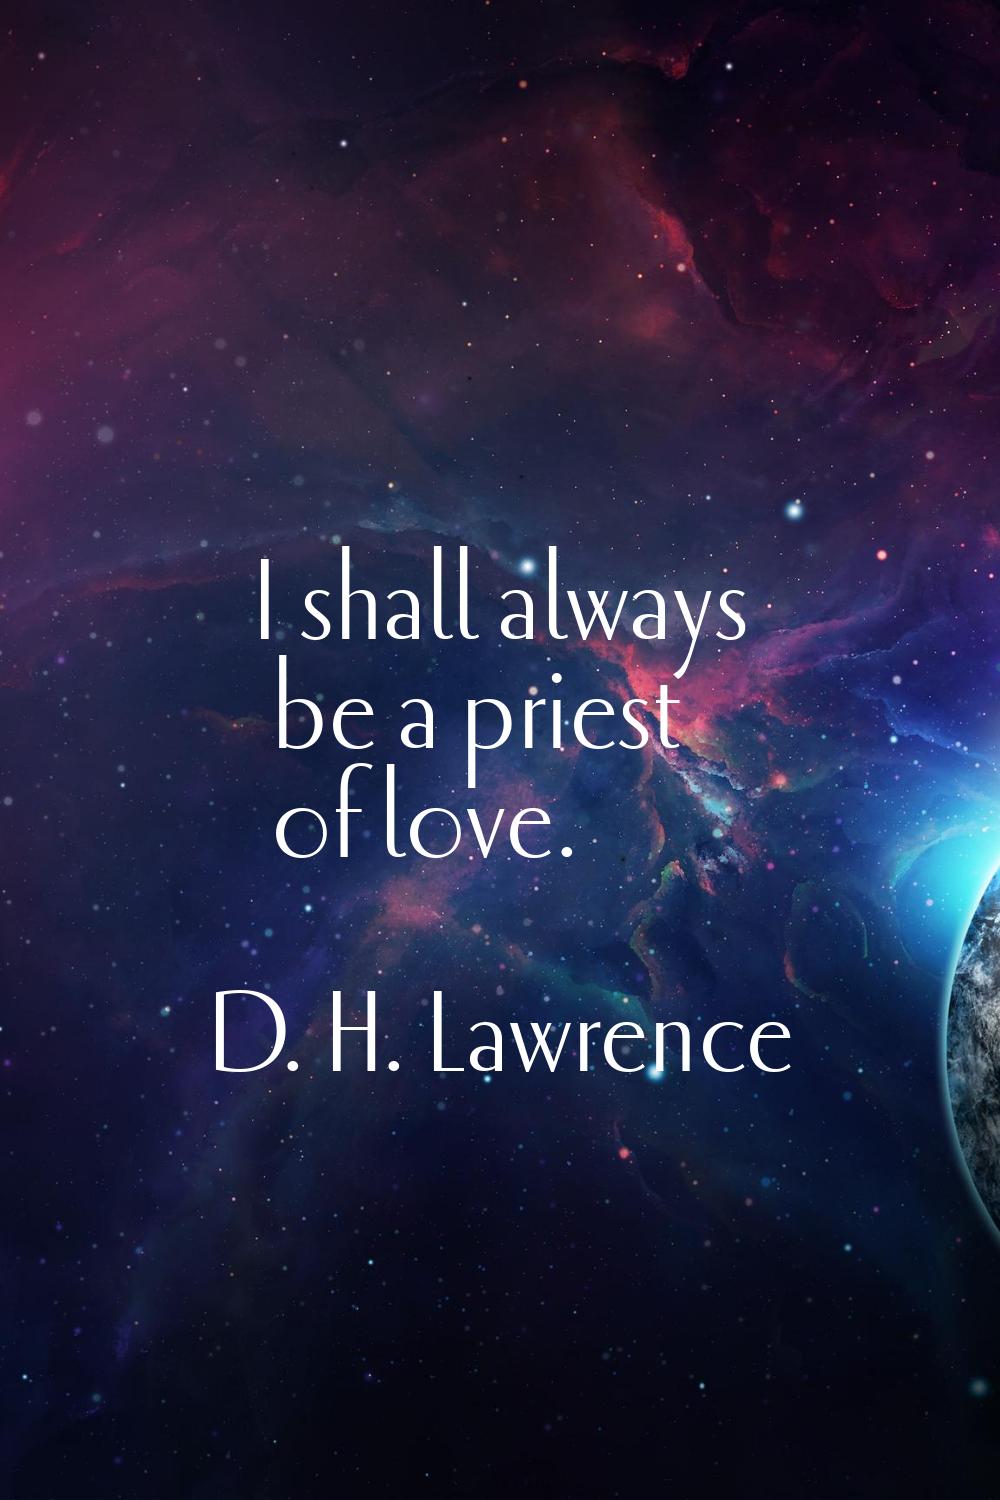 I shall always be a priest of love.